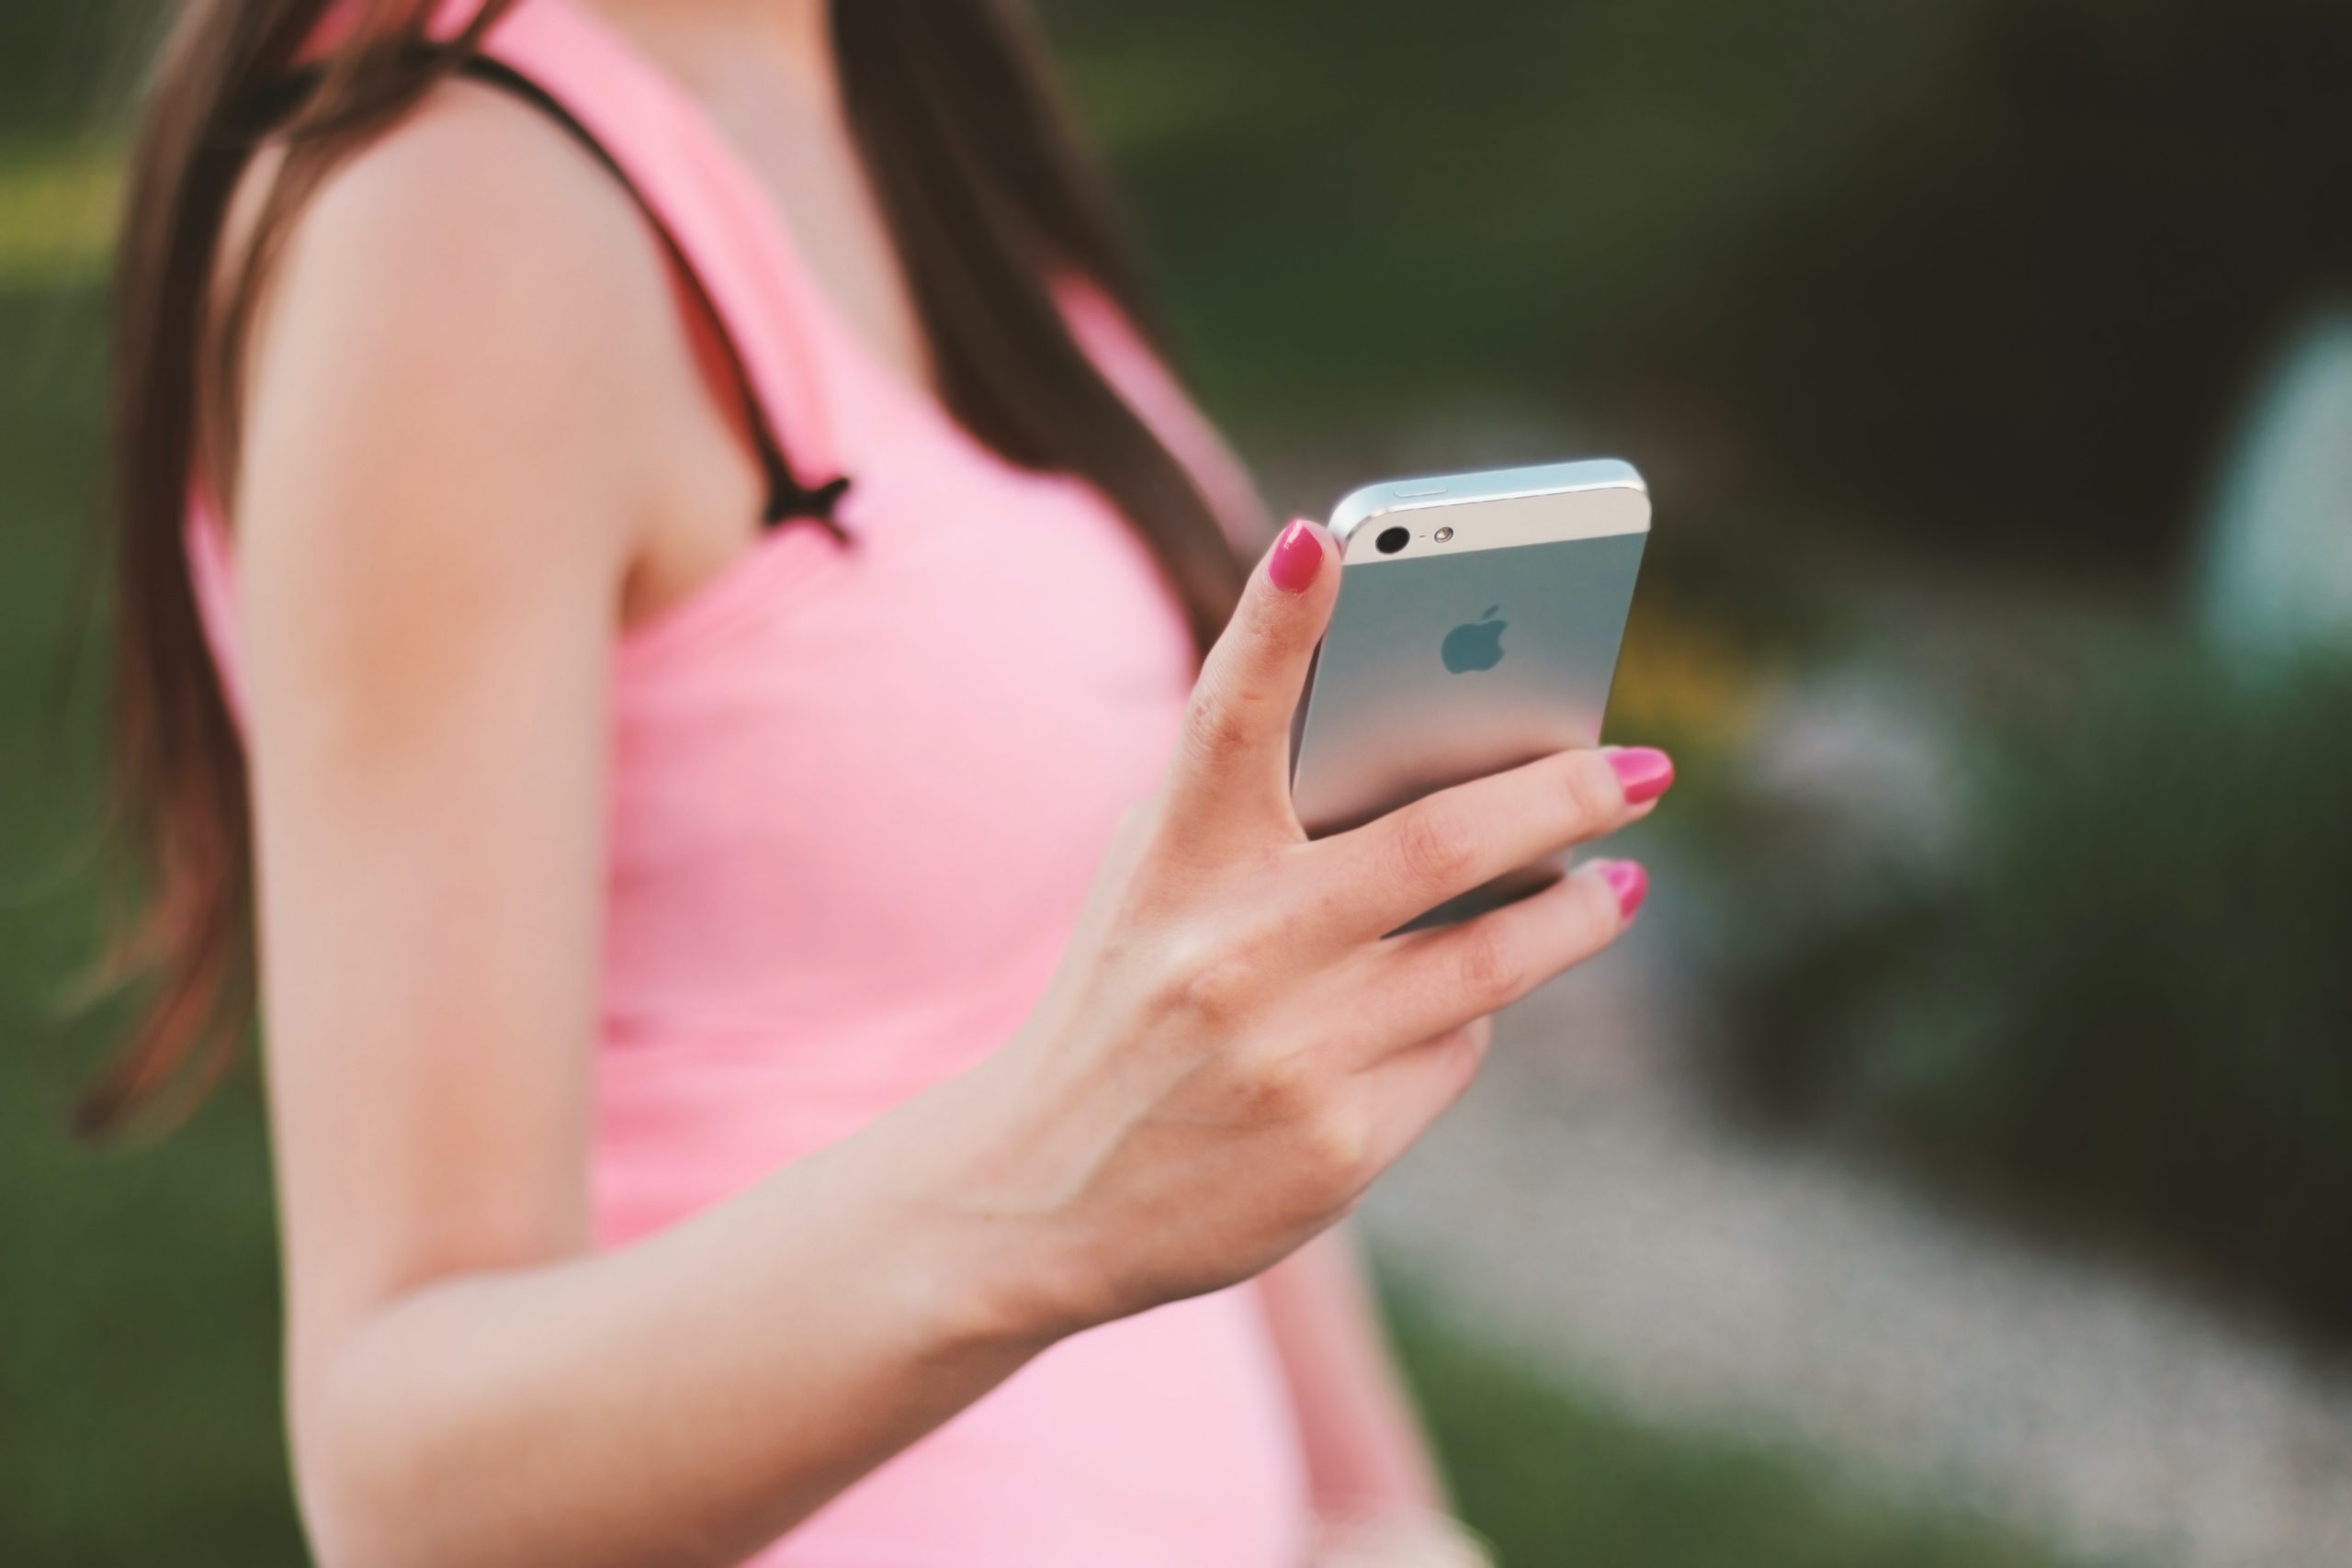 A woman in a pink shirt holding and looking at an iPhone.